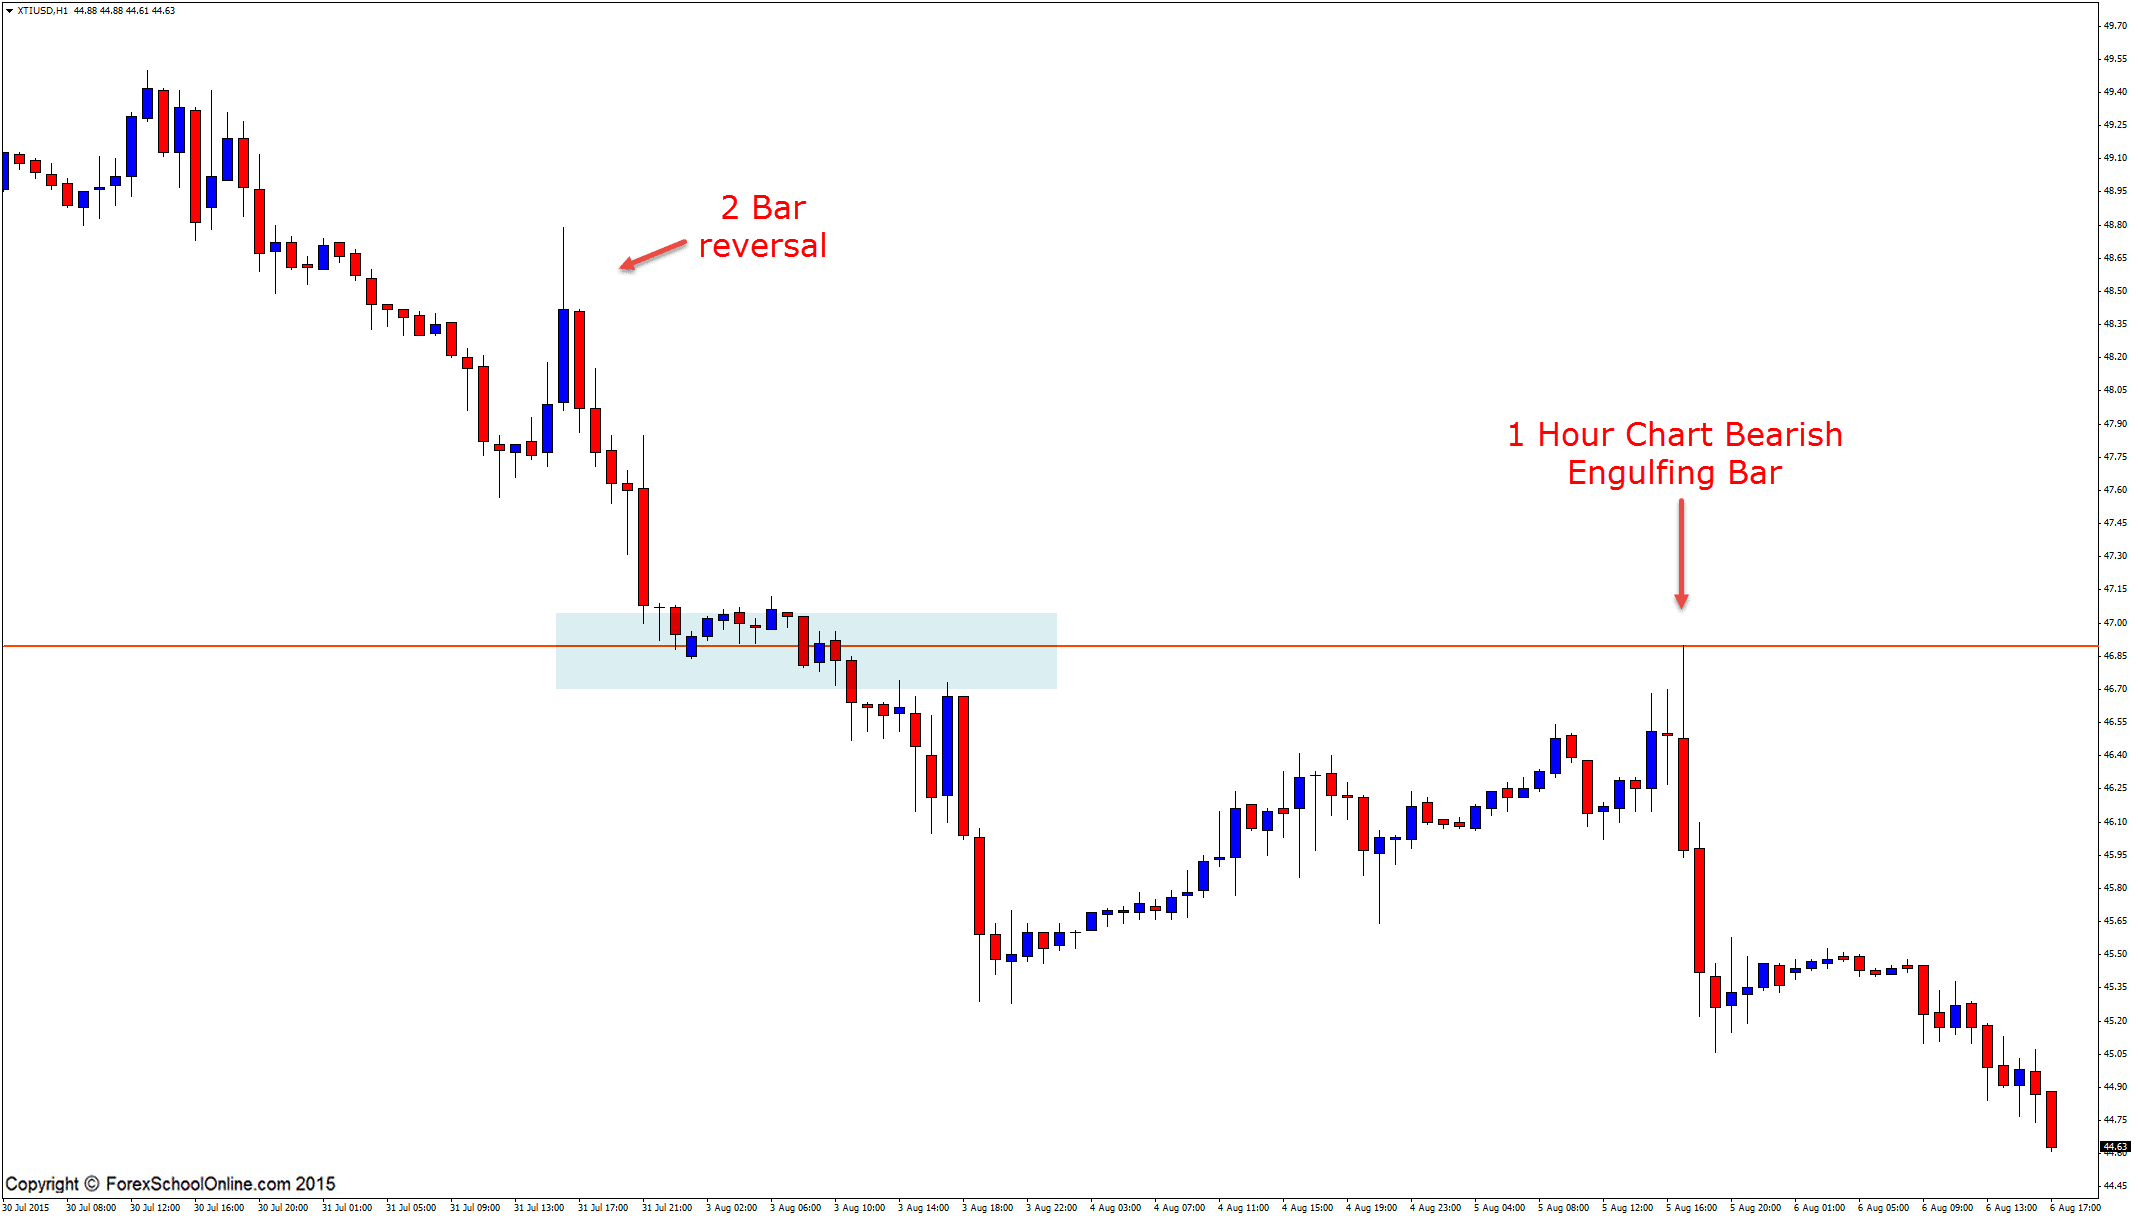 Oil 1 Hour price action engulfing bar